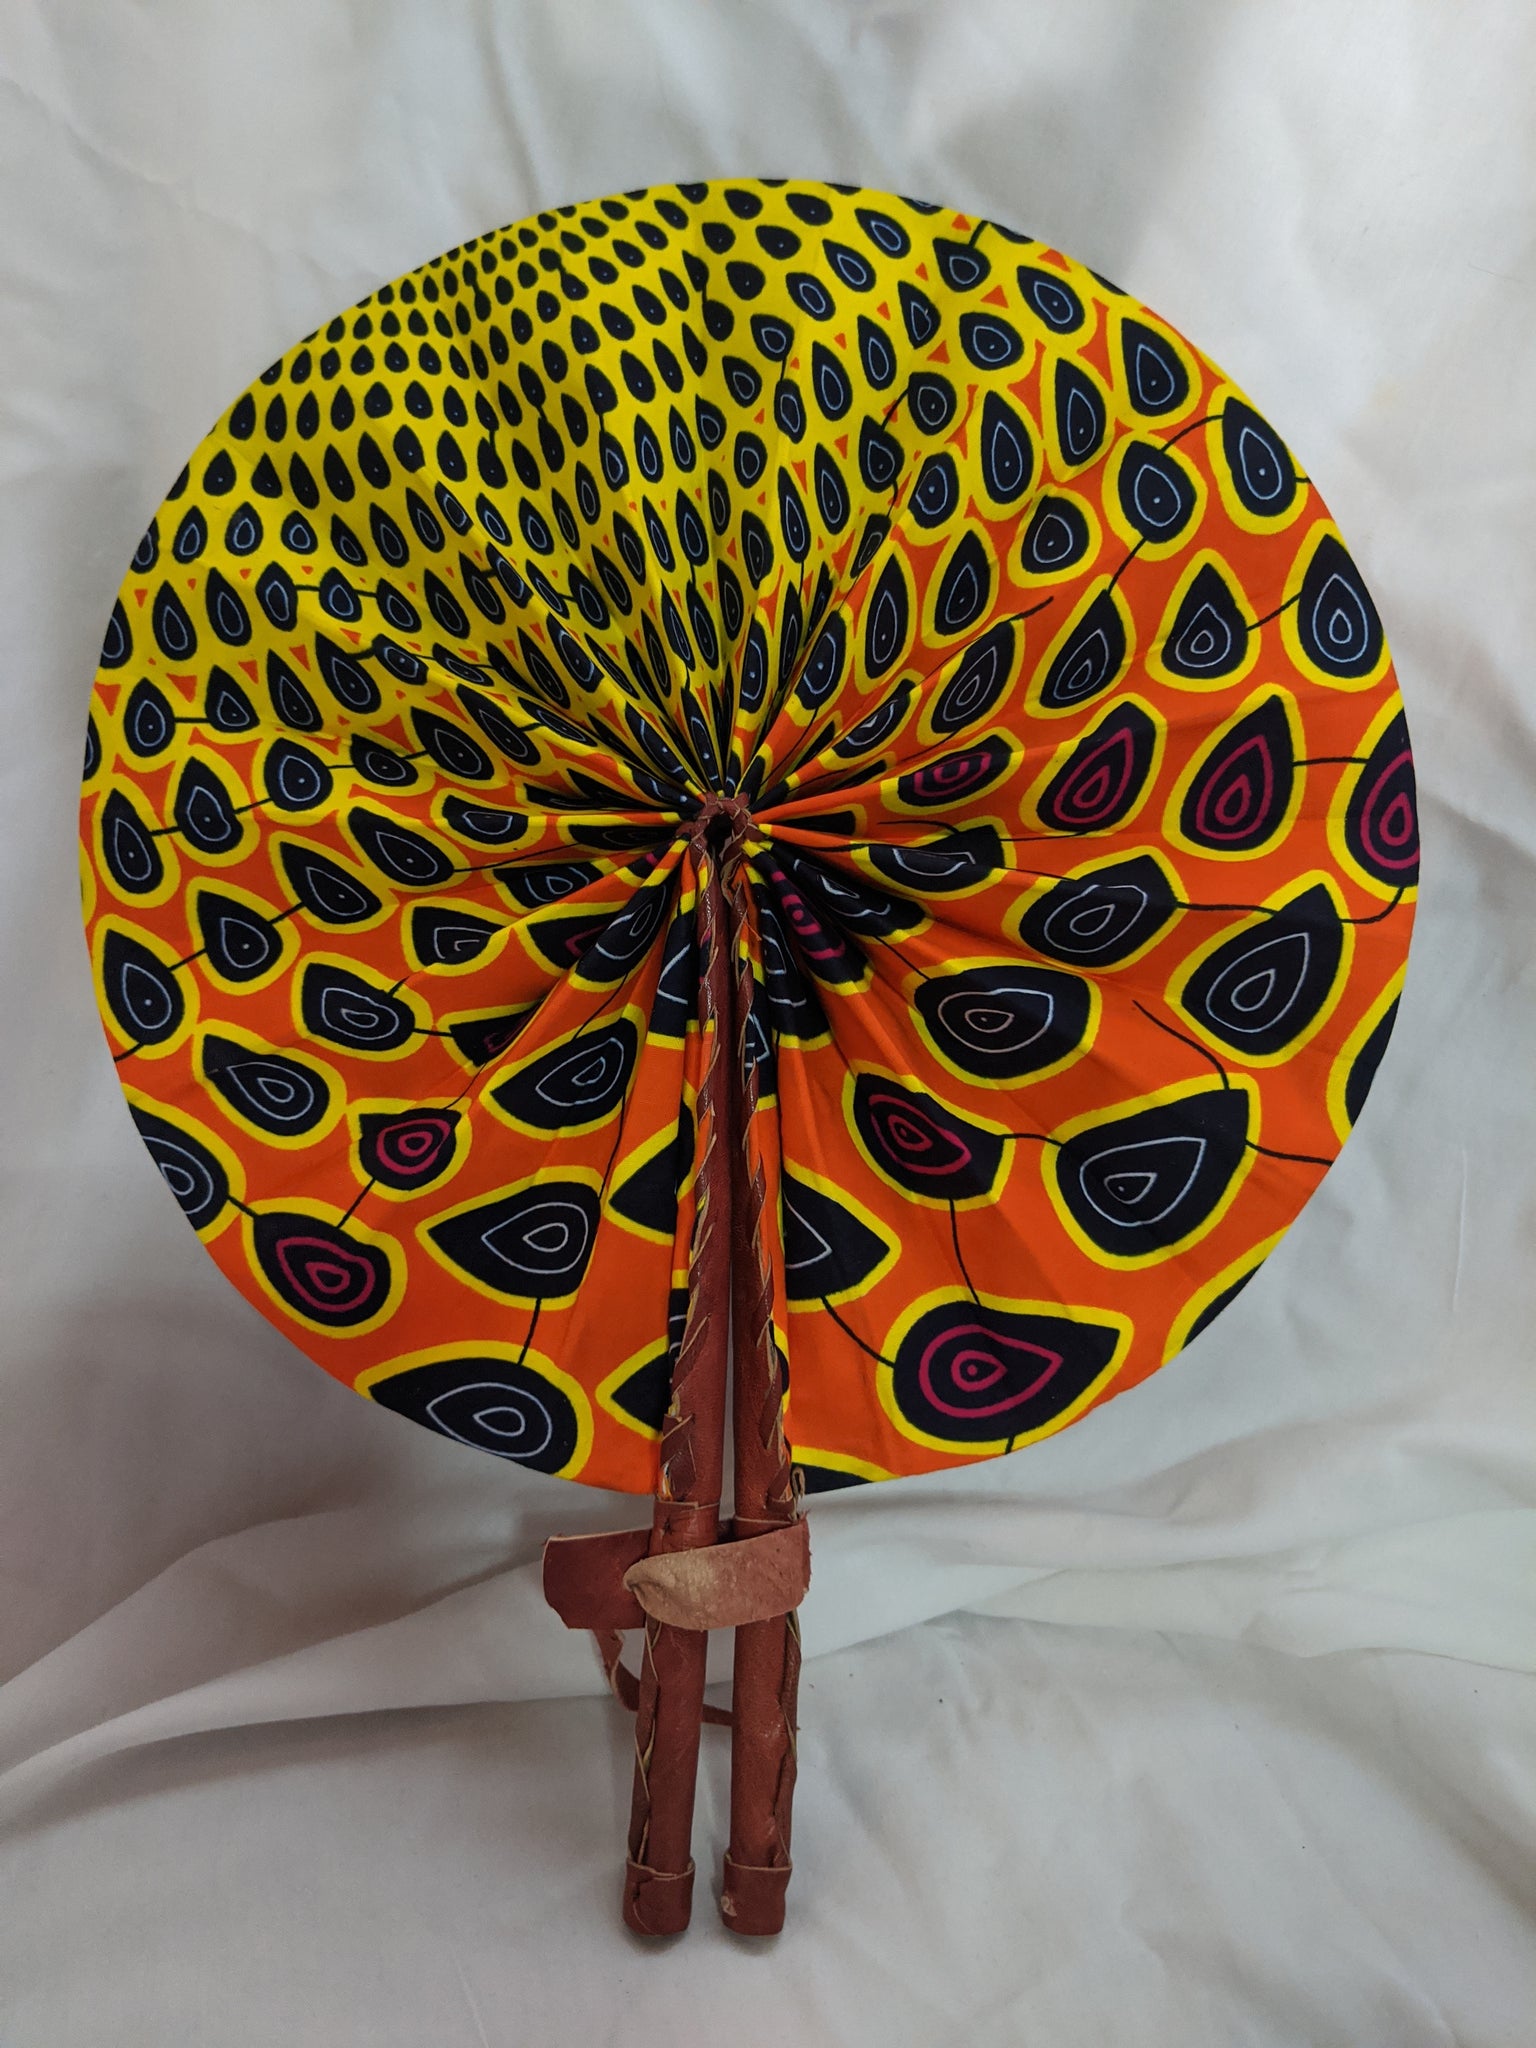 Colorful Ankara Fabric foldable hand fan with leather handles 3 peacock tear drops yellow gold orange red black